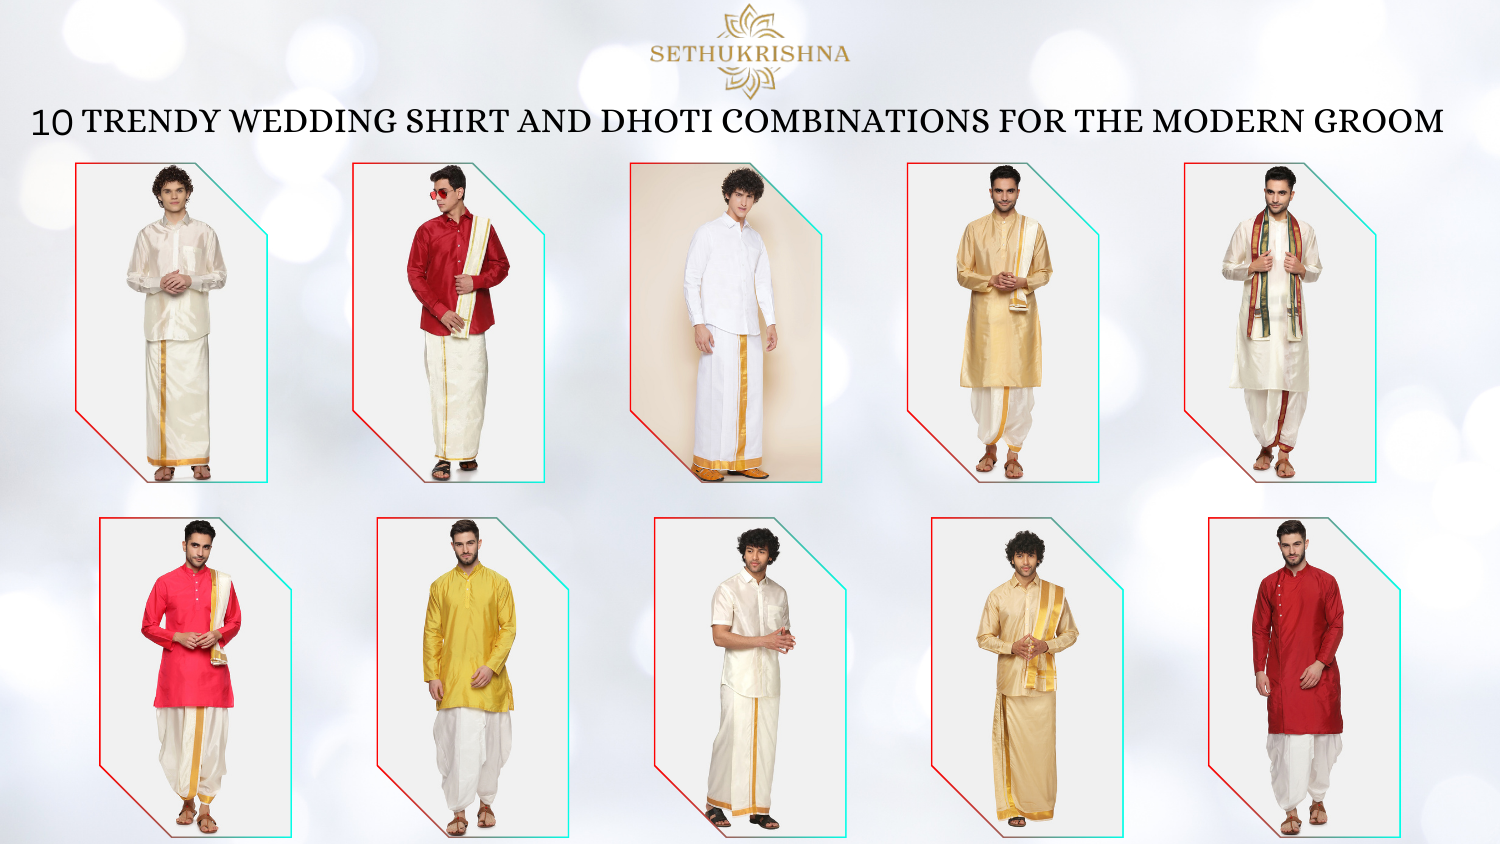 10 Trendy Wedding Shirt and Dhoti Combinations for the Modern Groom